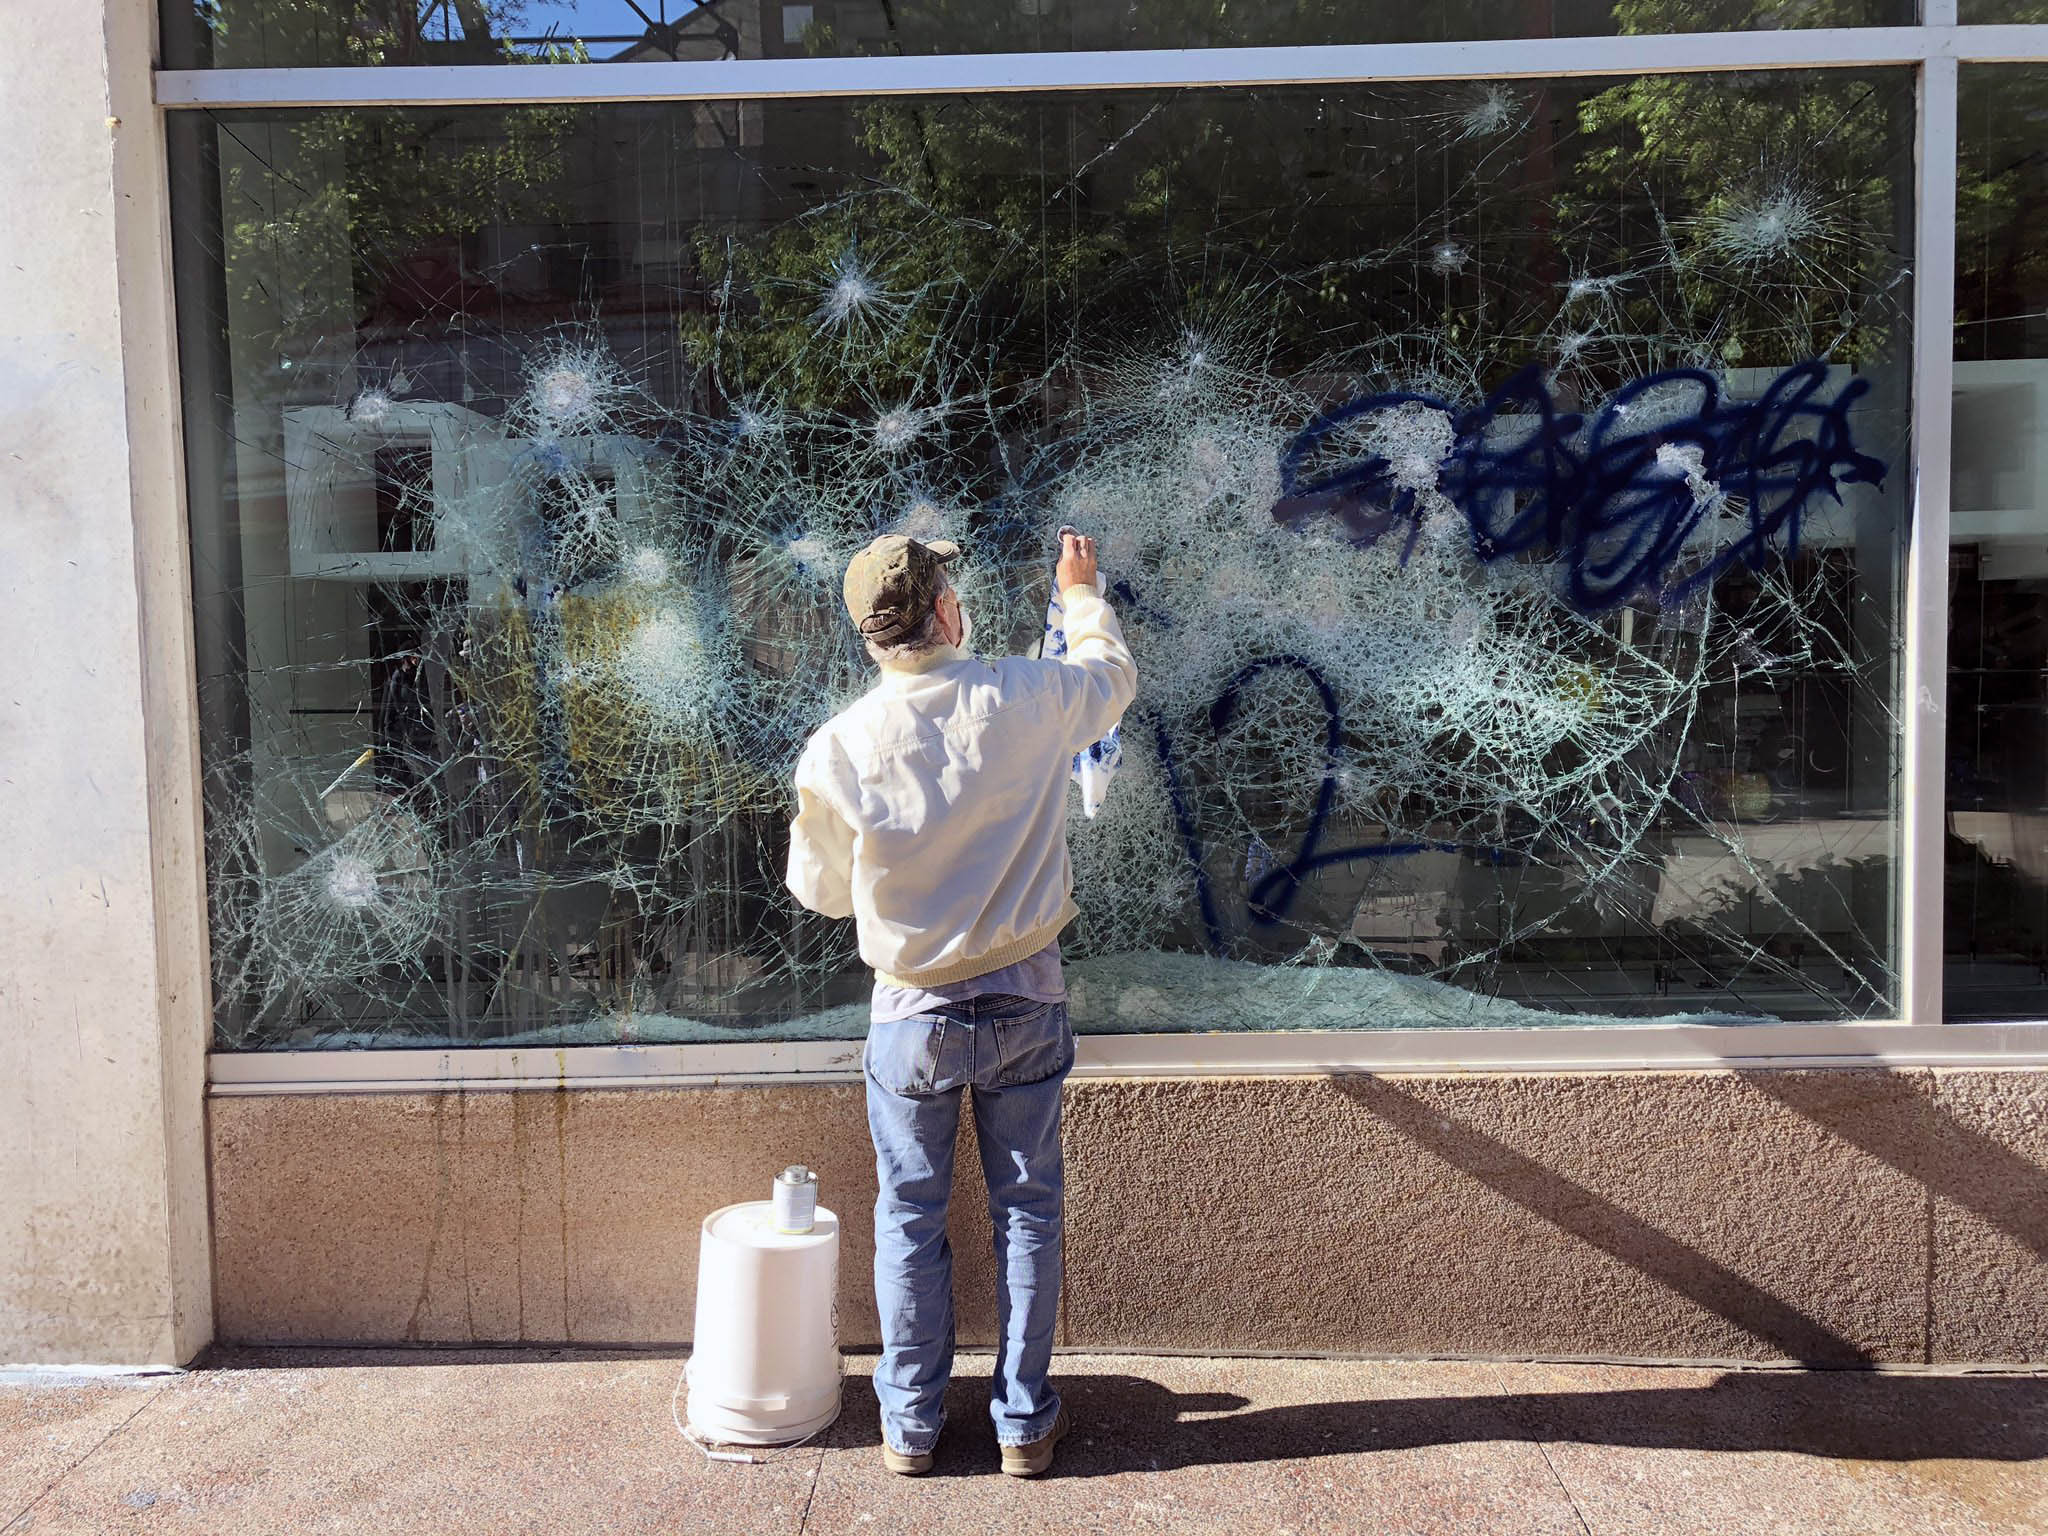 A person tries to clean and repair a window of the Museum of Modern Art store